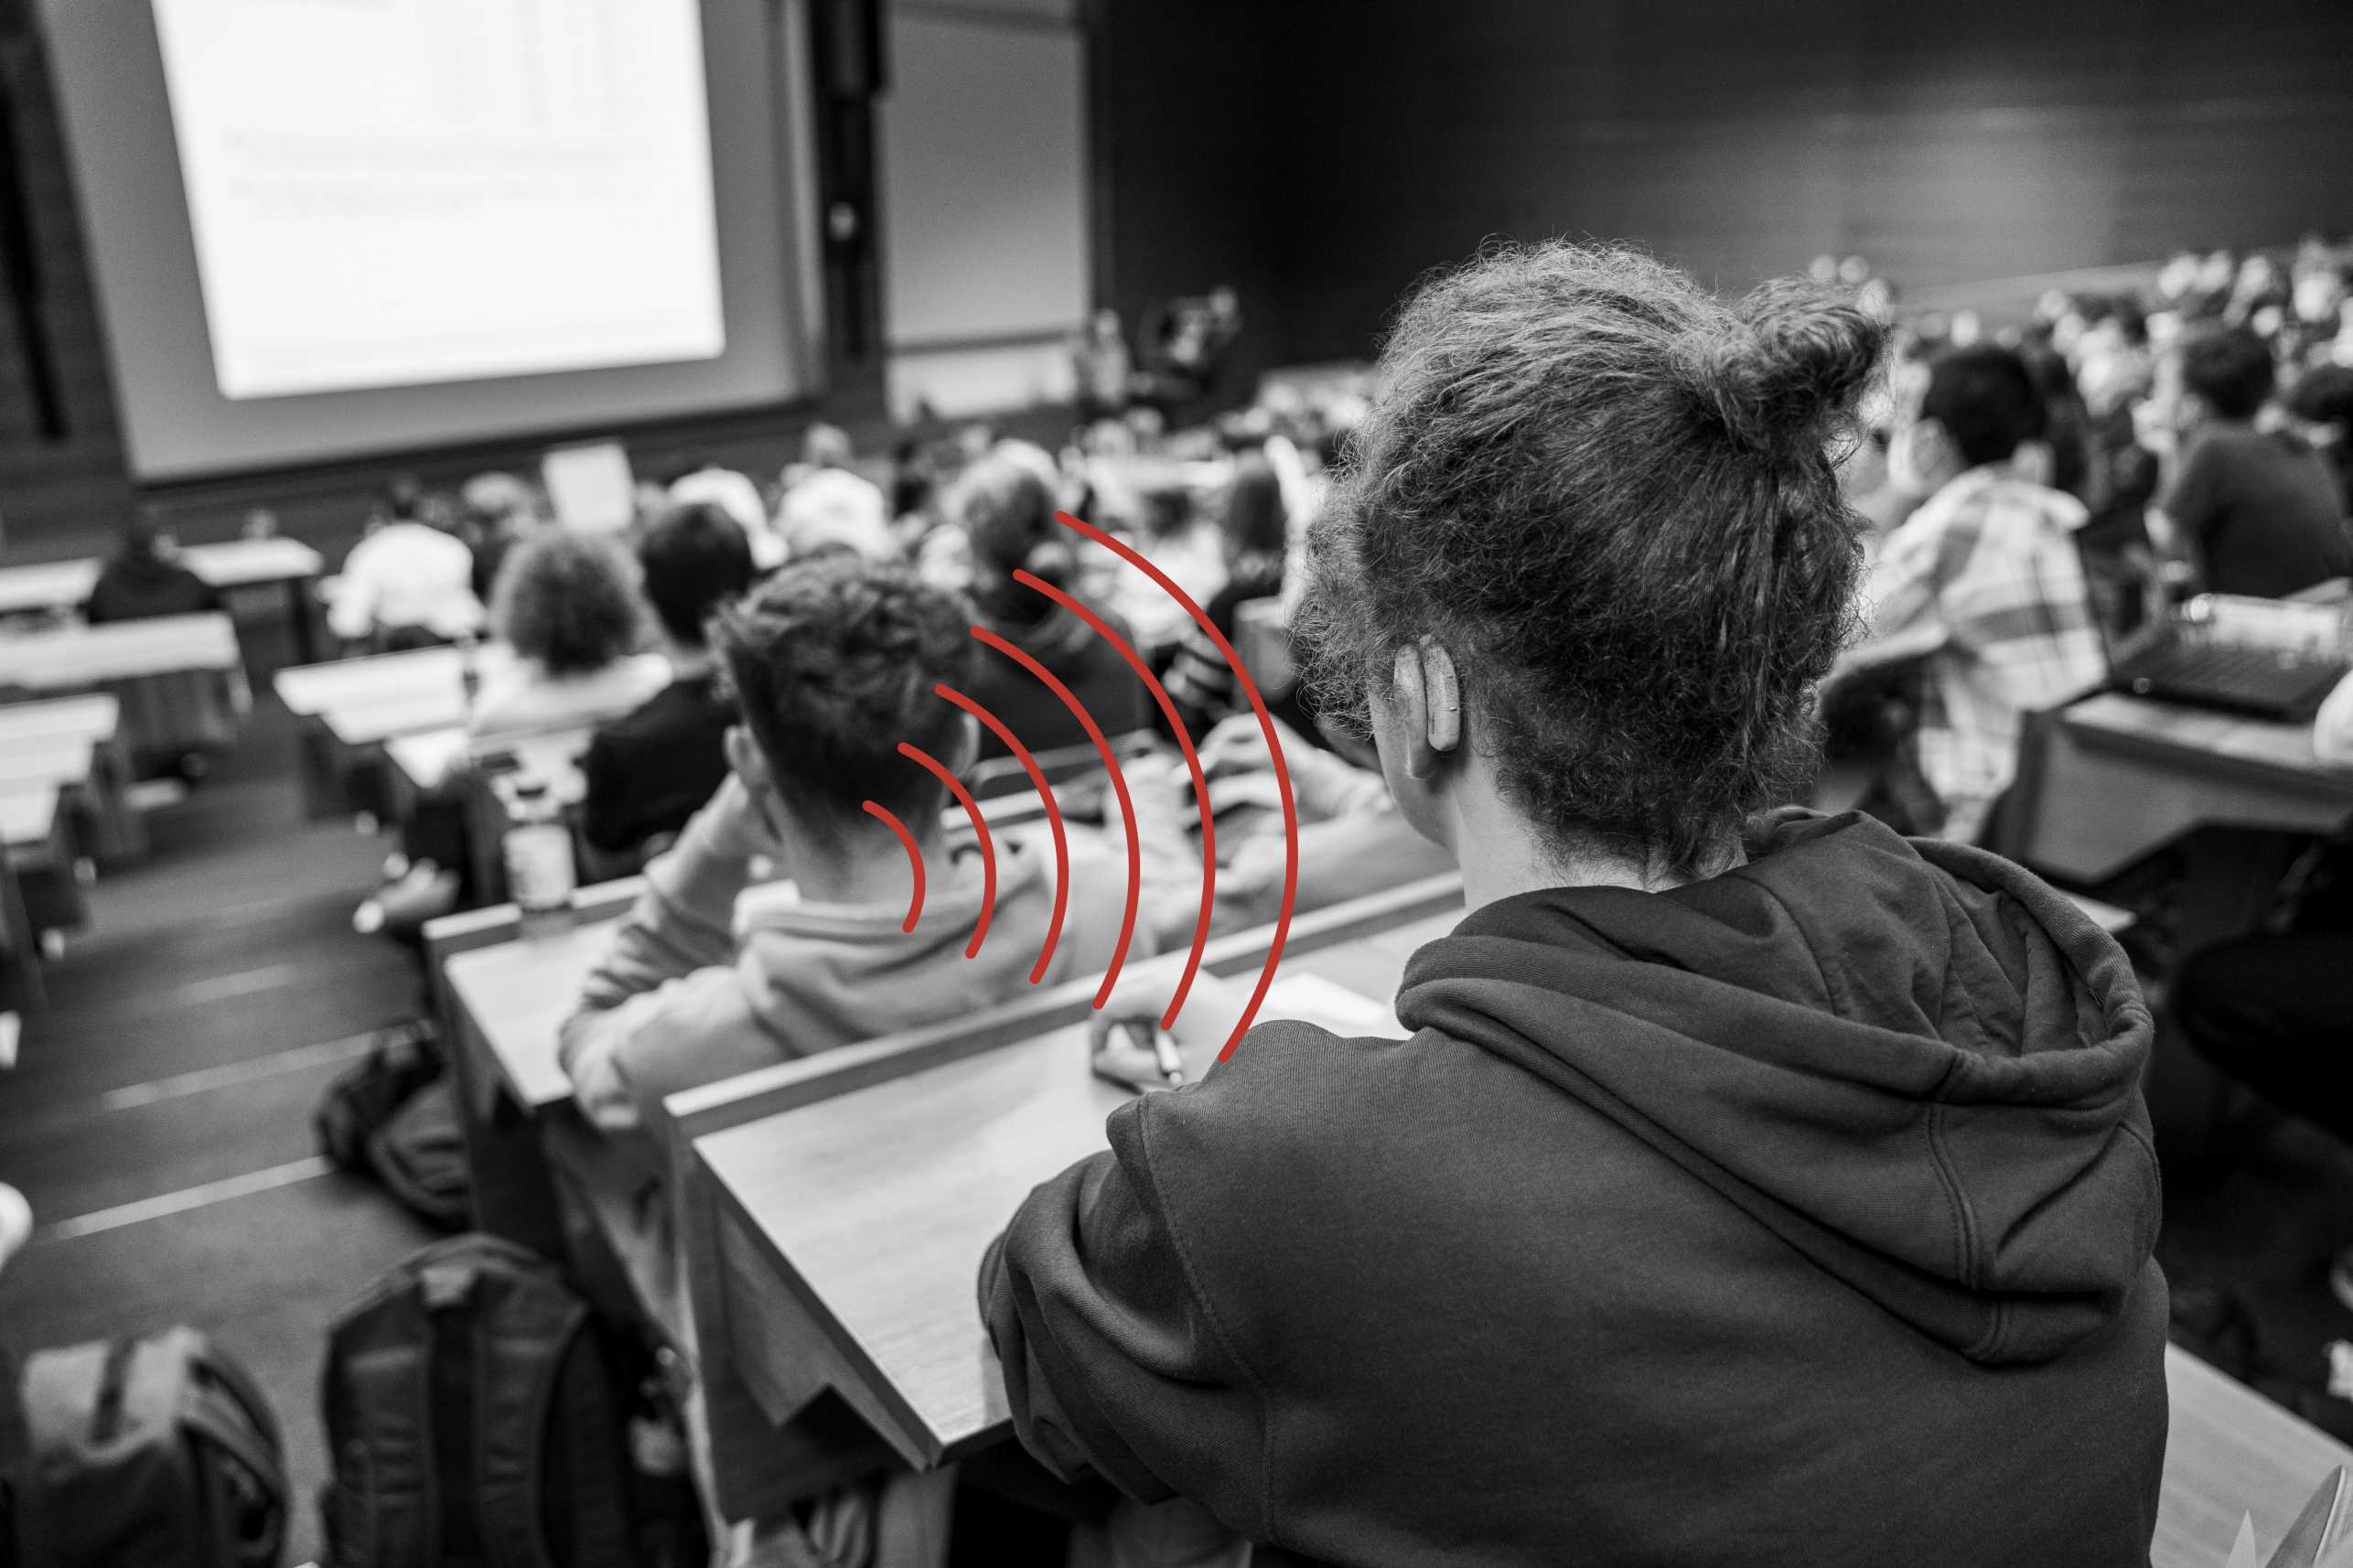 Enlarged view: A student with a hearing aid sits in a lecture hall full of students. The hearing aid picks up the acoustic signals via an induction loop.